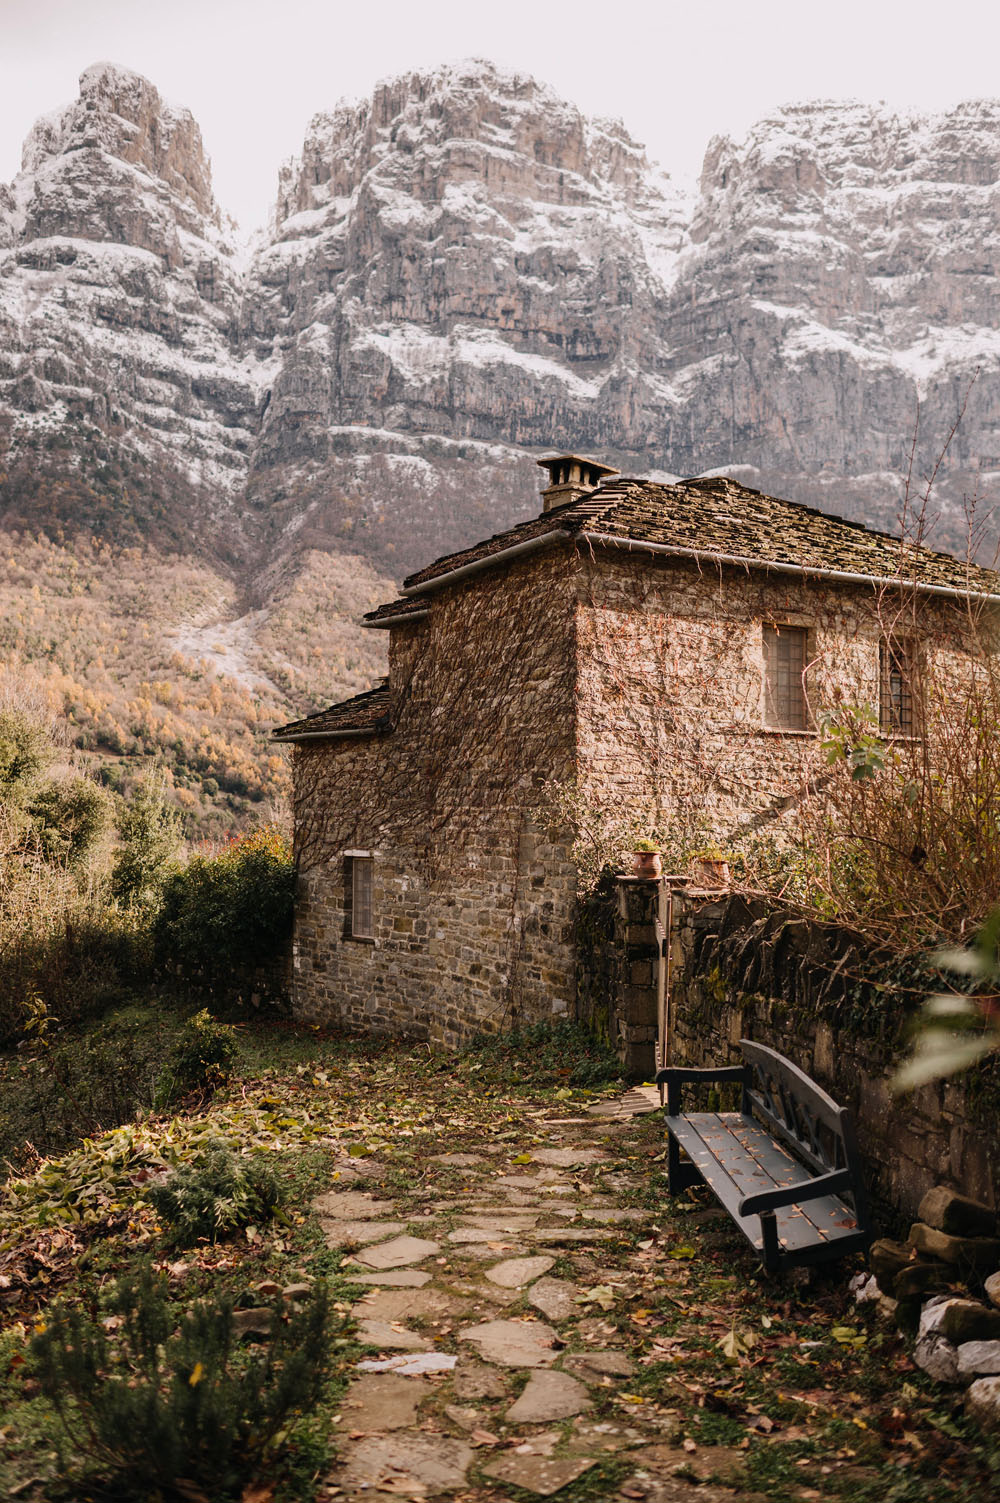 Winter elopement in the mountains of Greece